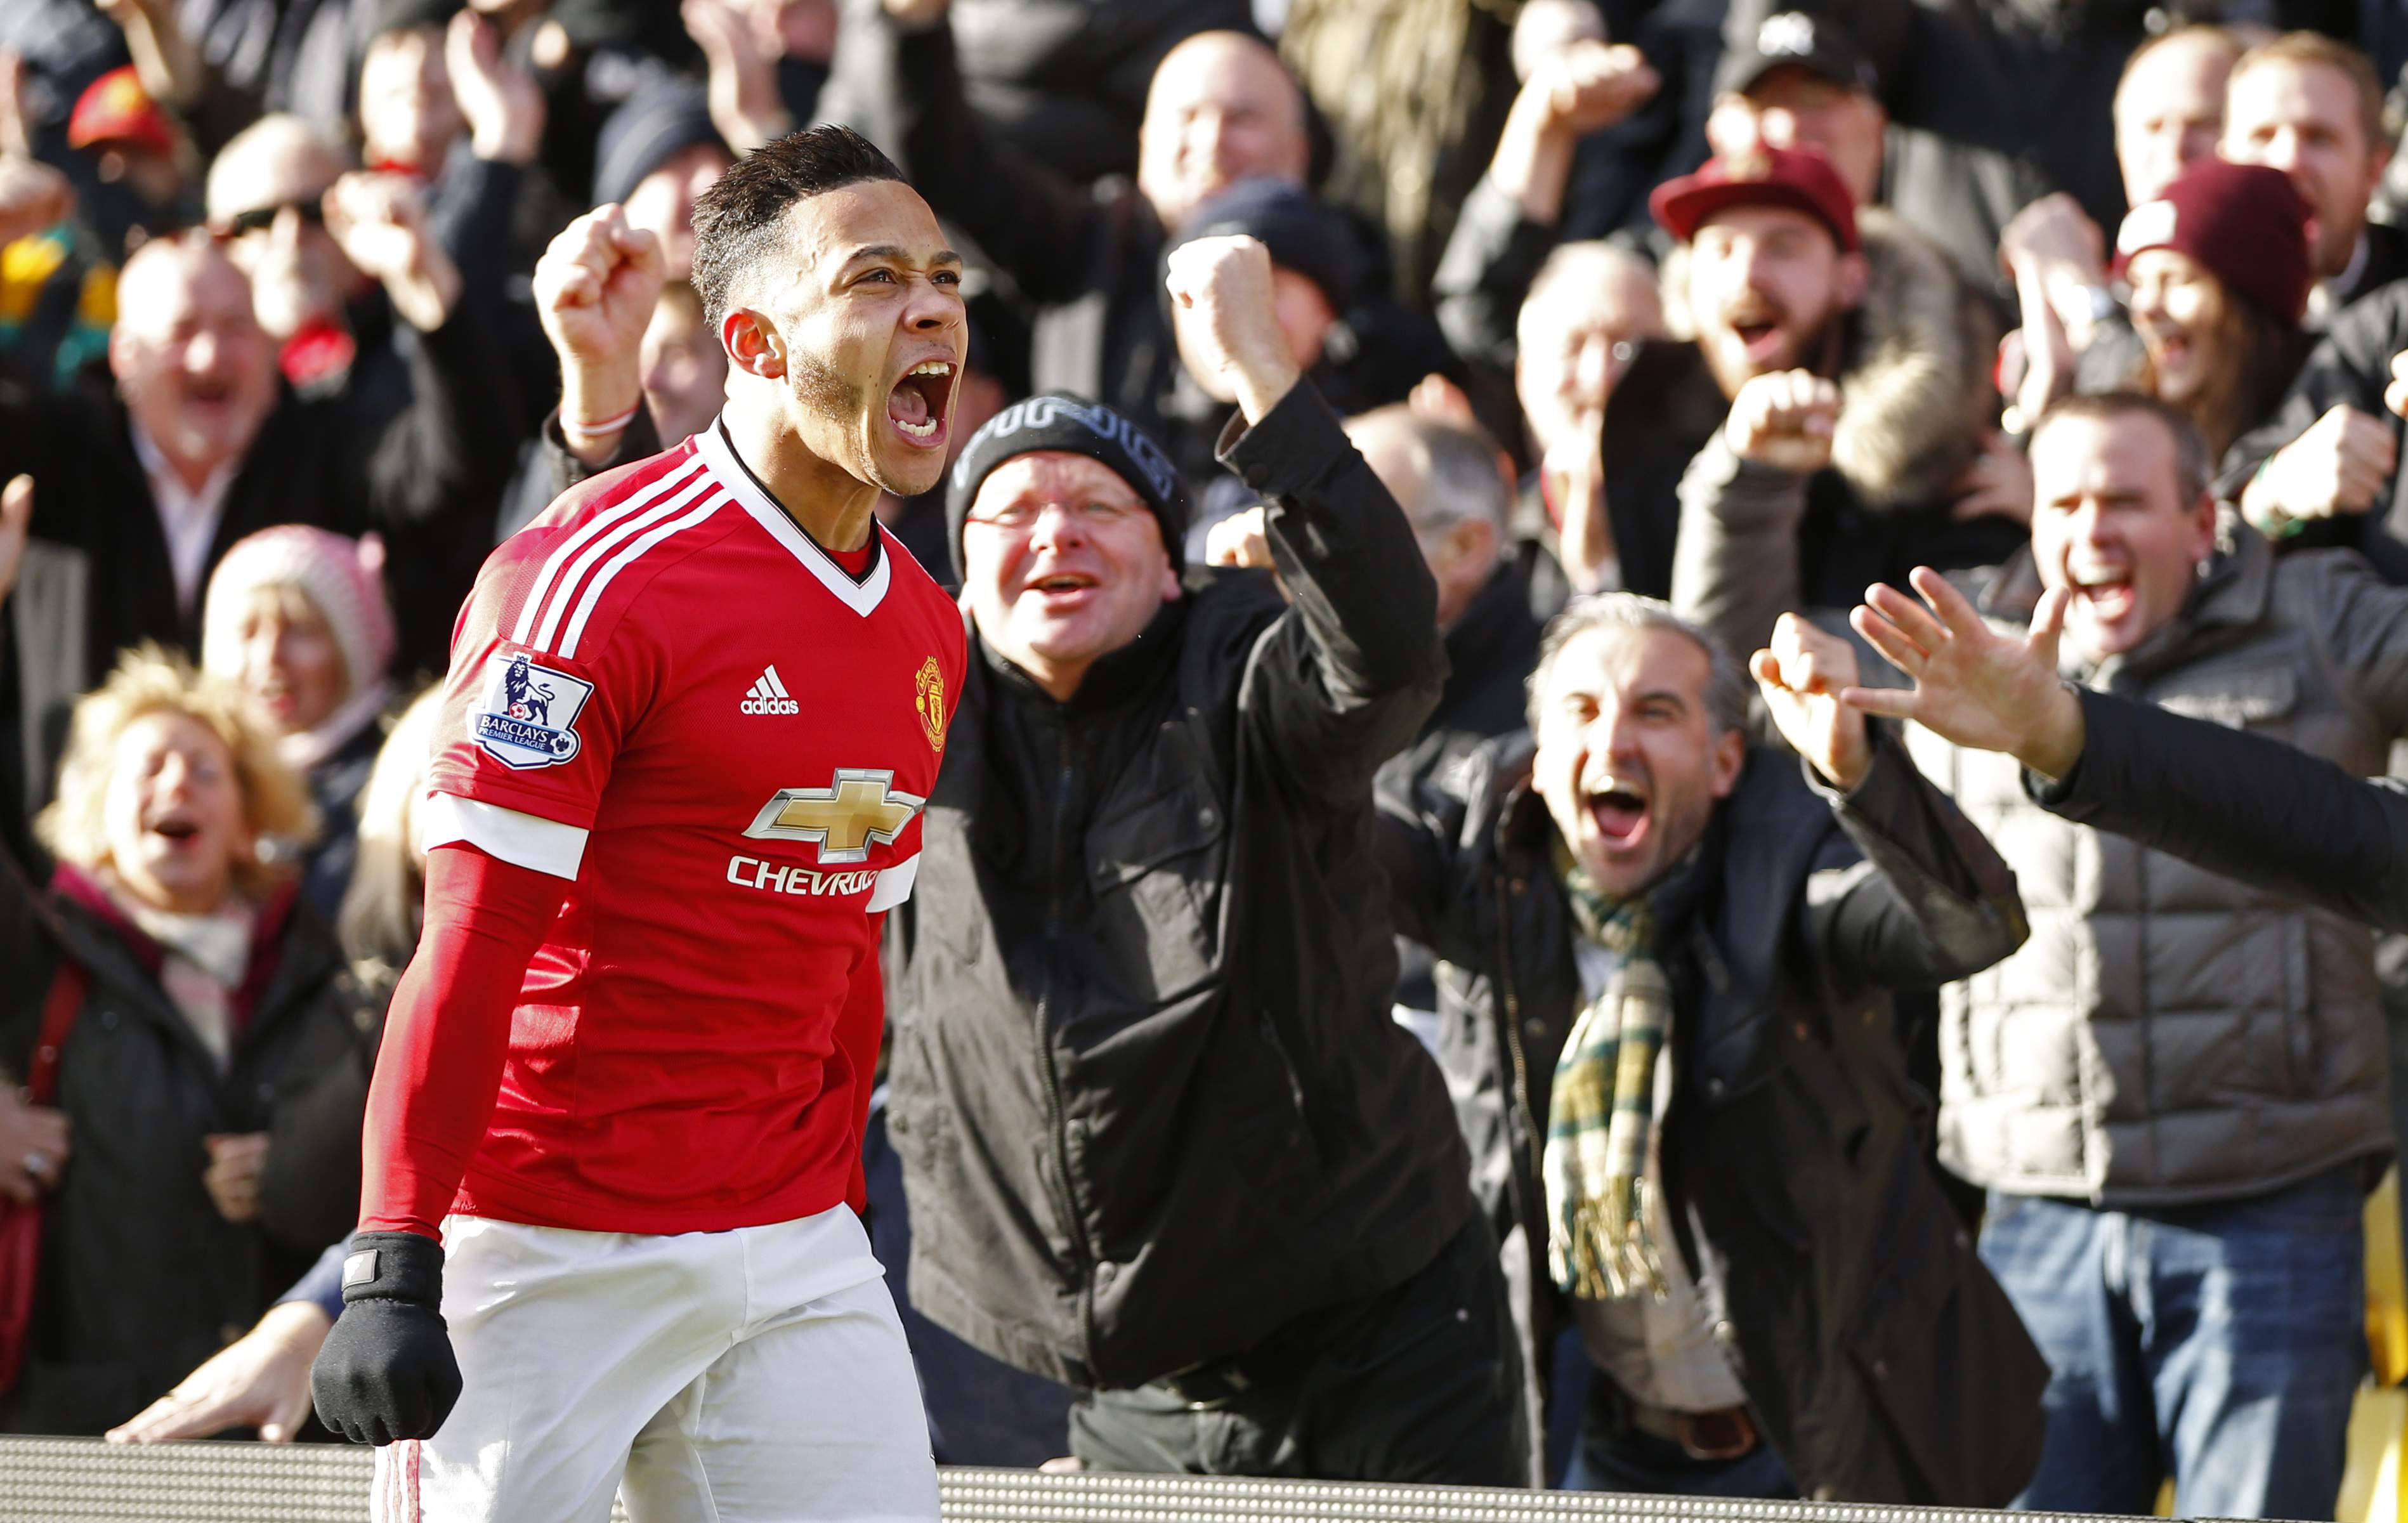 Football - Watford v Manchester United - Barclays Premier League - Vicarage Road - 21/11/15 Memphis Depay celebrates after scoring the first goal for Manchester United Action Images via Reuters / John Sibley Livepic EDITORIAL USE ONLY. No use with unauthorized audio, video, data, fixture lists, club/league logos or "live" services. Online in-match use limited to 45 images, no video emulation. No use in betting, games or single club/league/player publications. Please contact your account representative for further details.